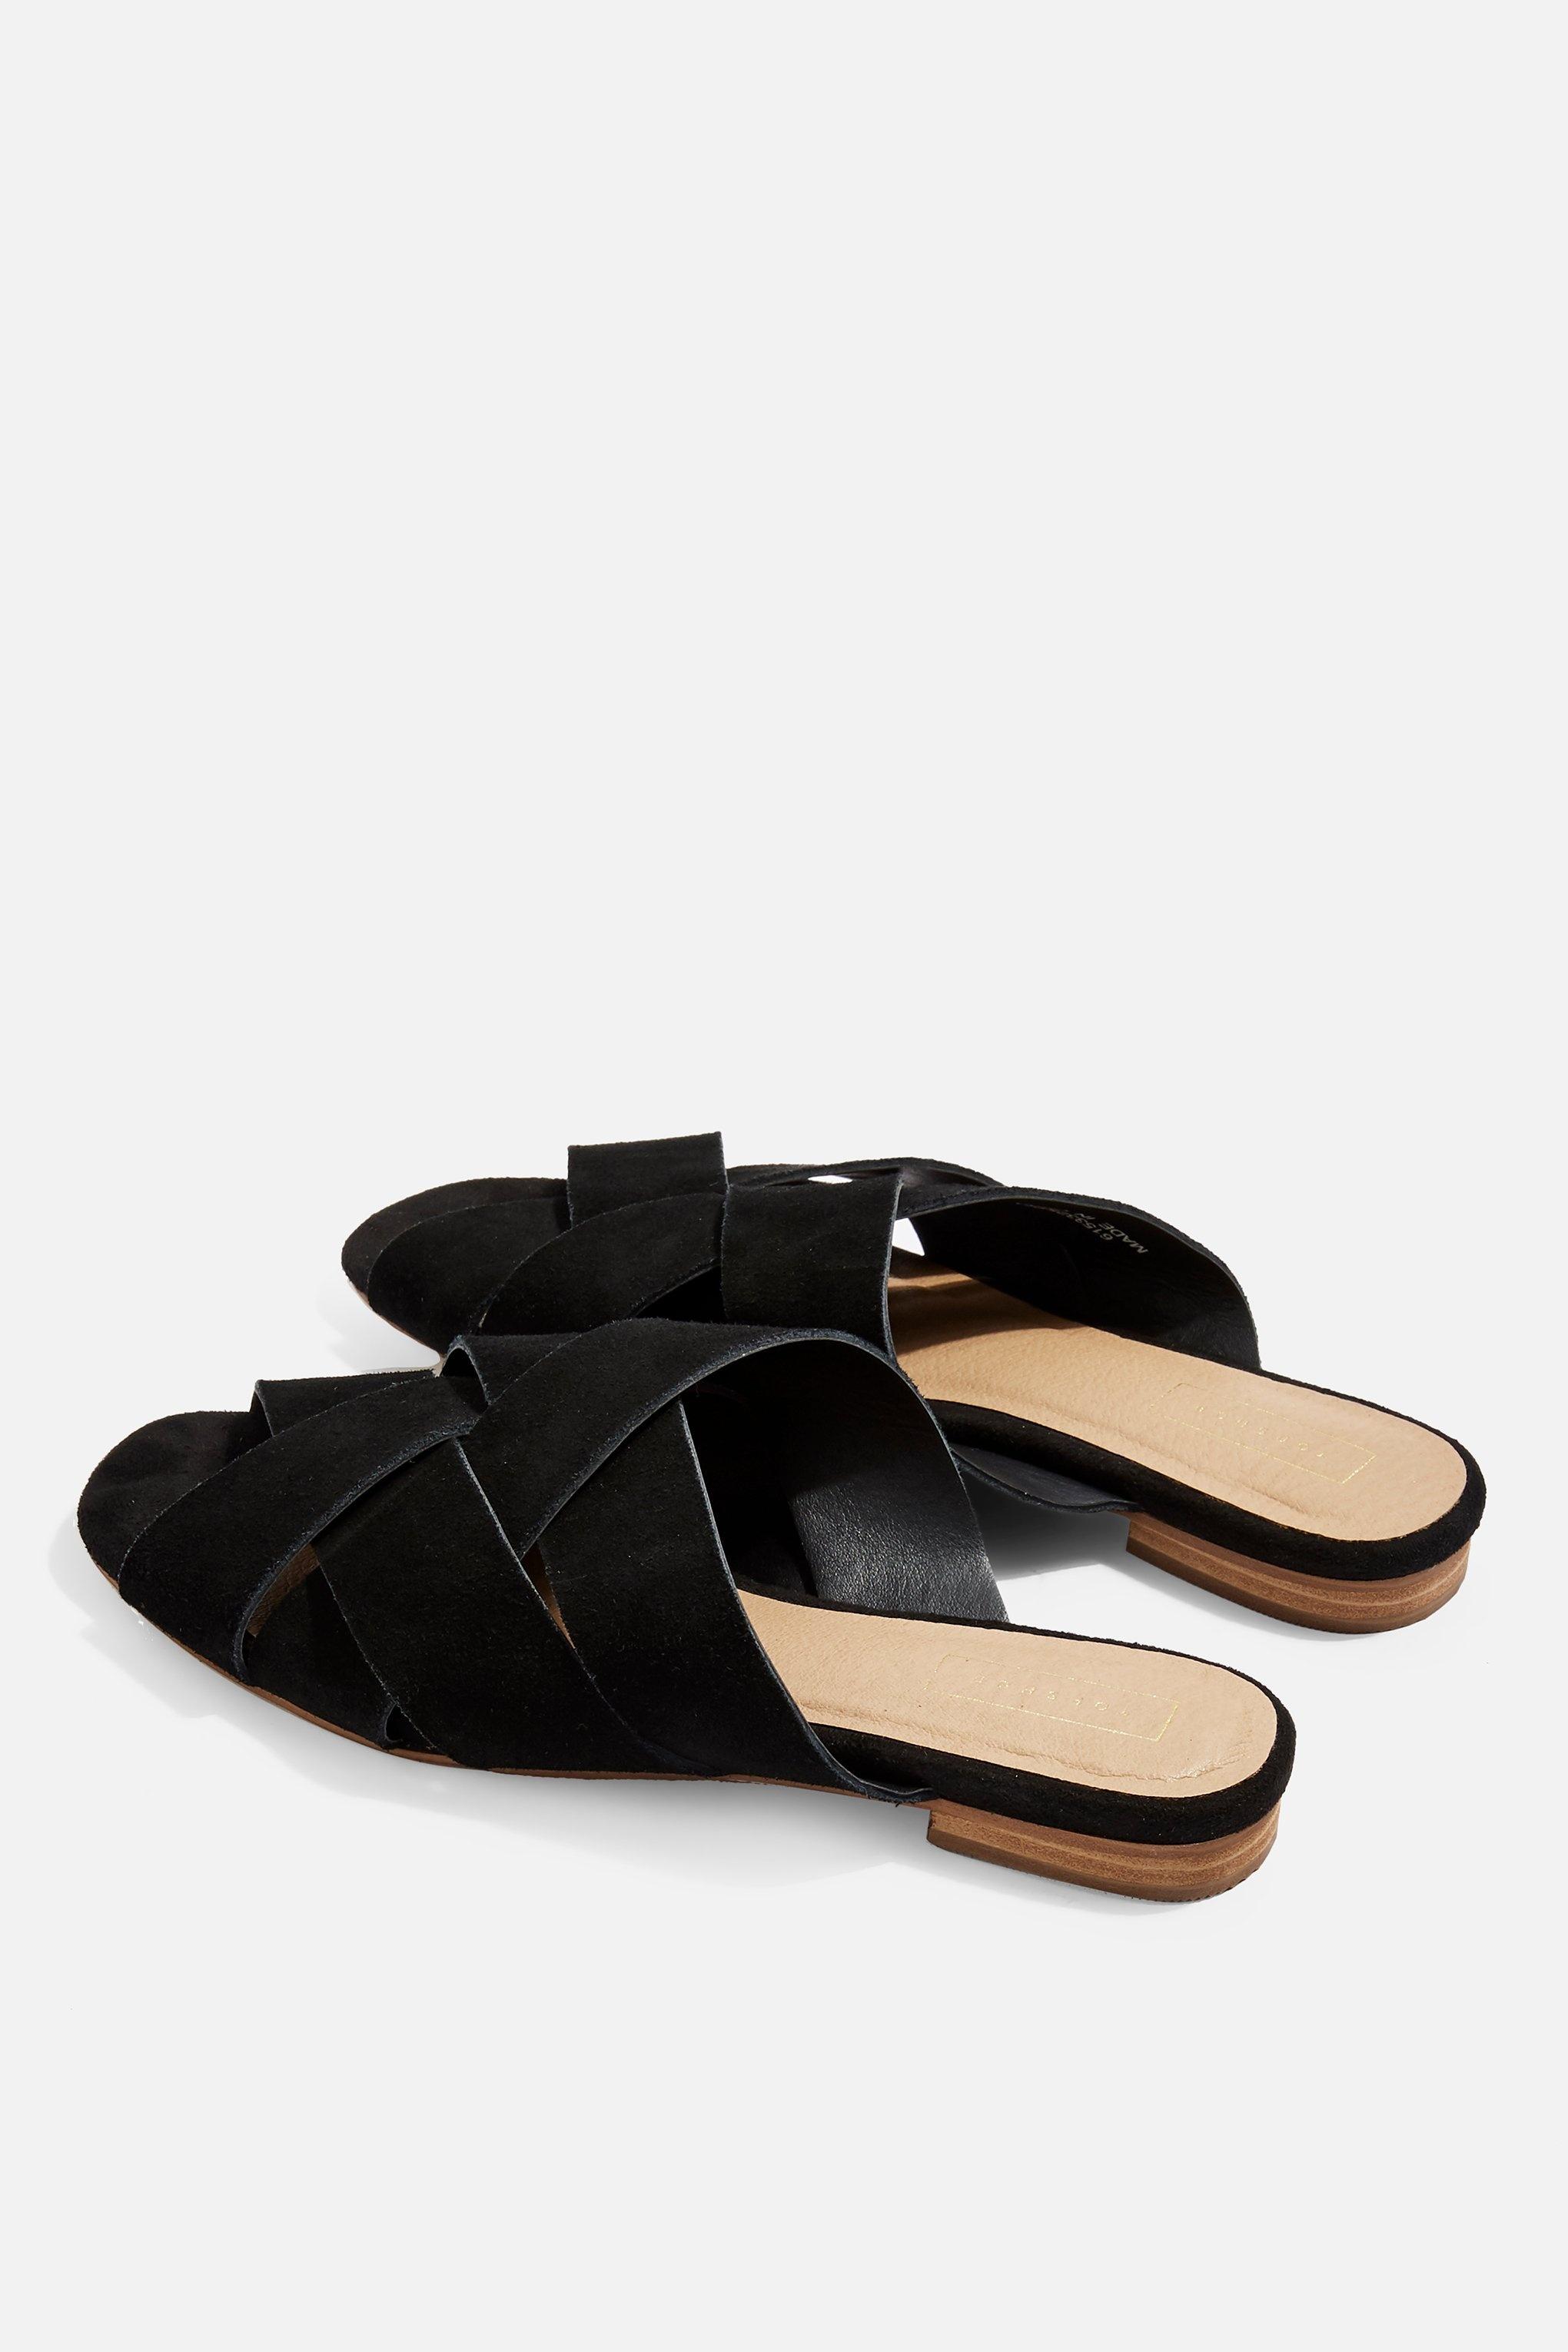 TOPSHOP Leather Hop Flat Sandals in 